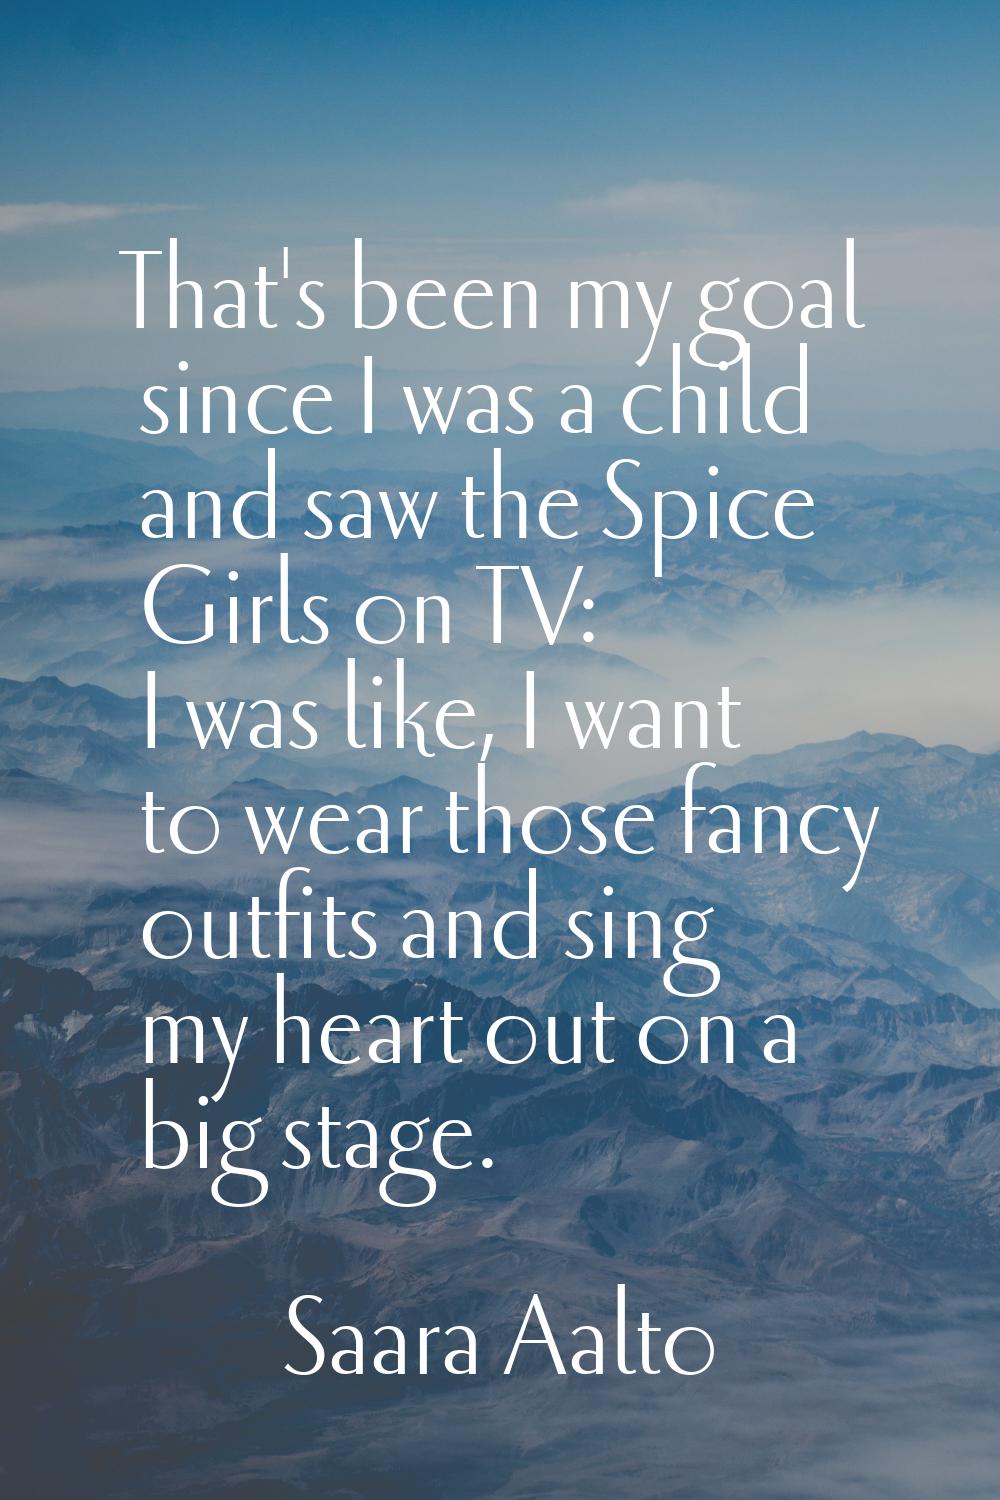 That's been my goal since I was a child and saw the Spice Girls on TV: I was like, I want to wear t